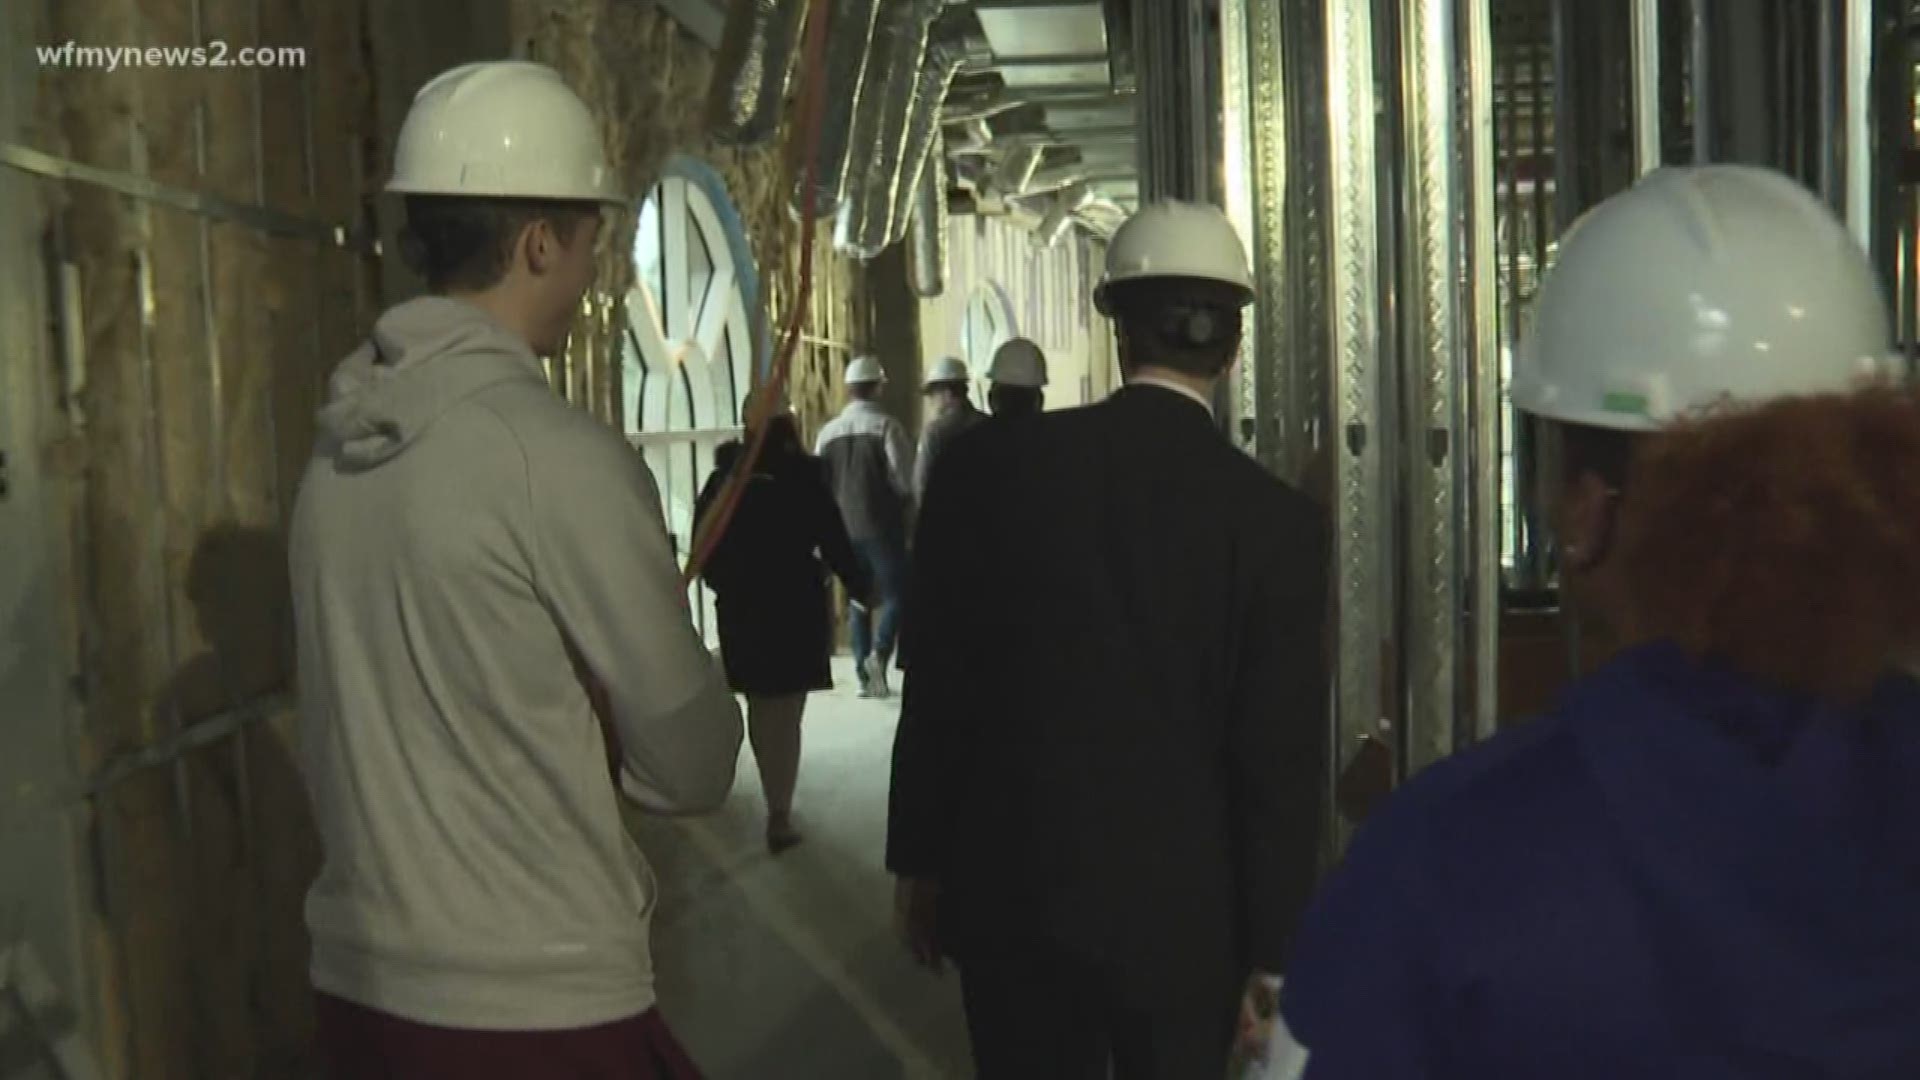 WFMY News 2 took an inside look at the $120 million project and the progress that’s been made so far.